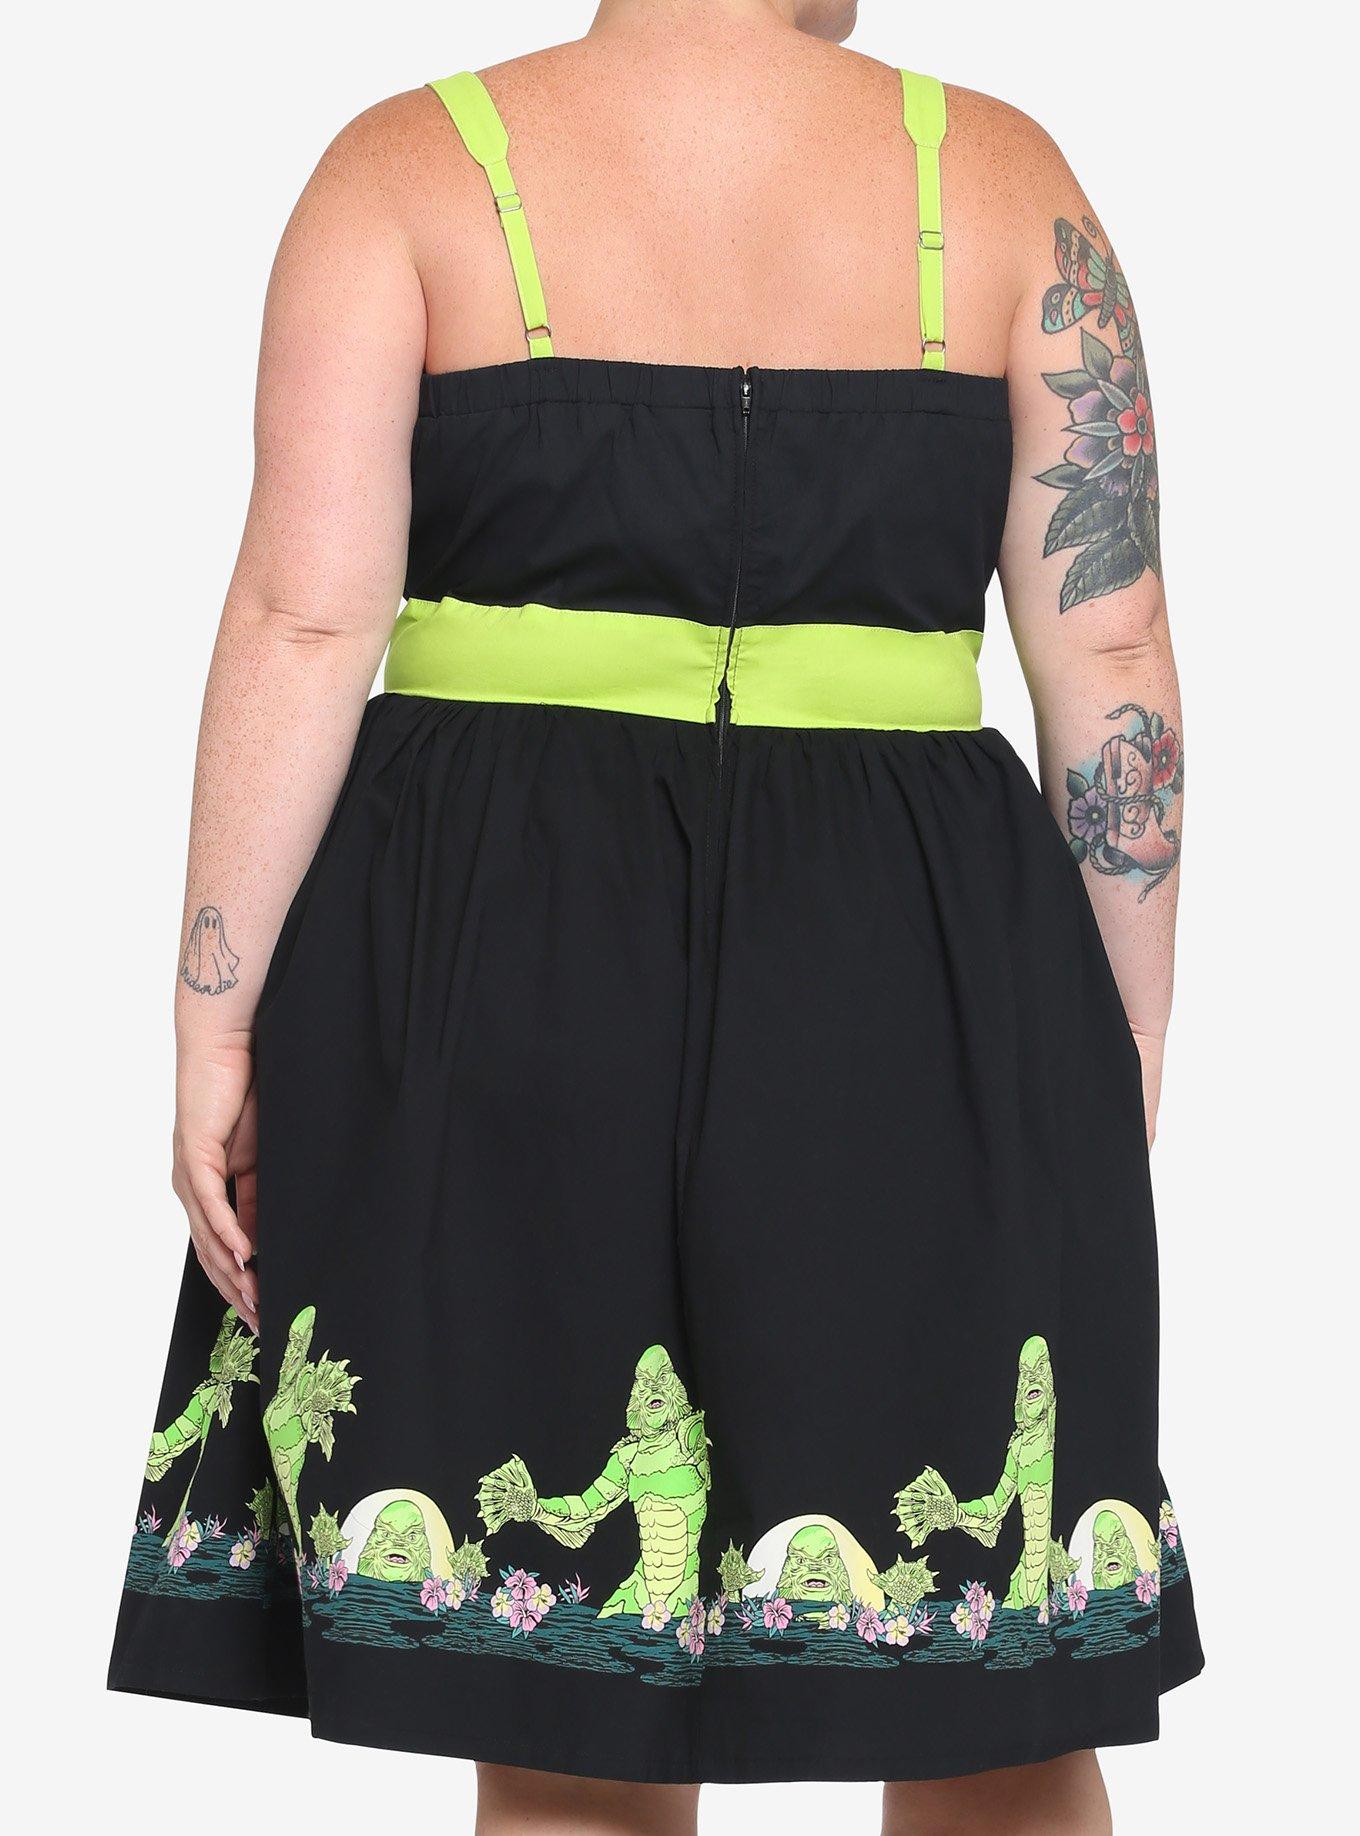 Universal Monsters Creature From The Black Lagoon Lace-Up Dress Plus Size, MULTI, alternate